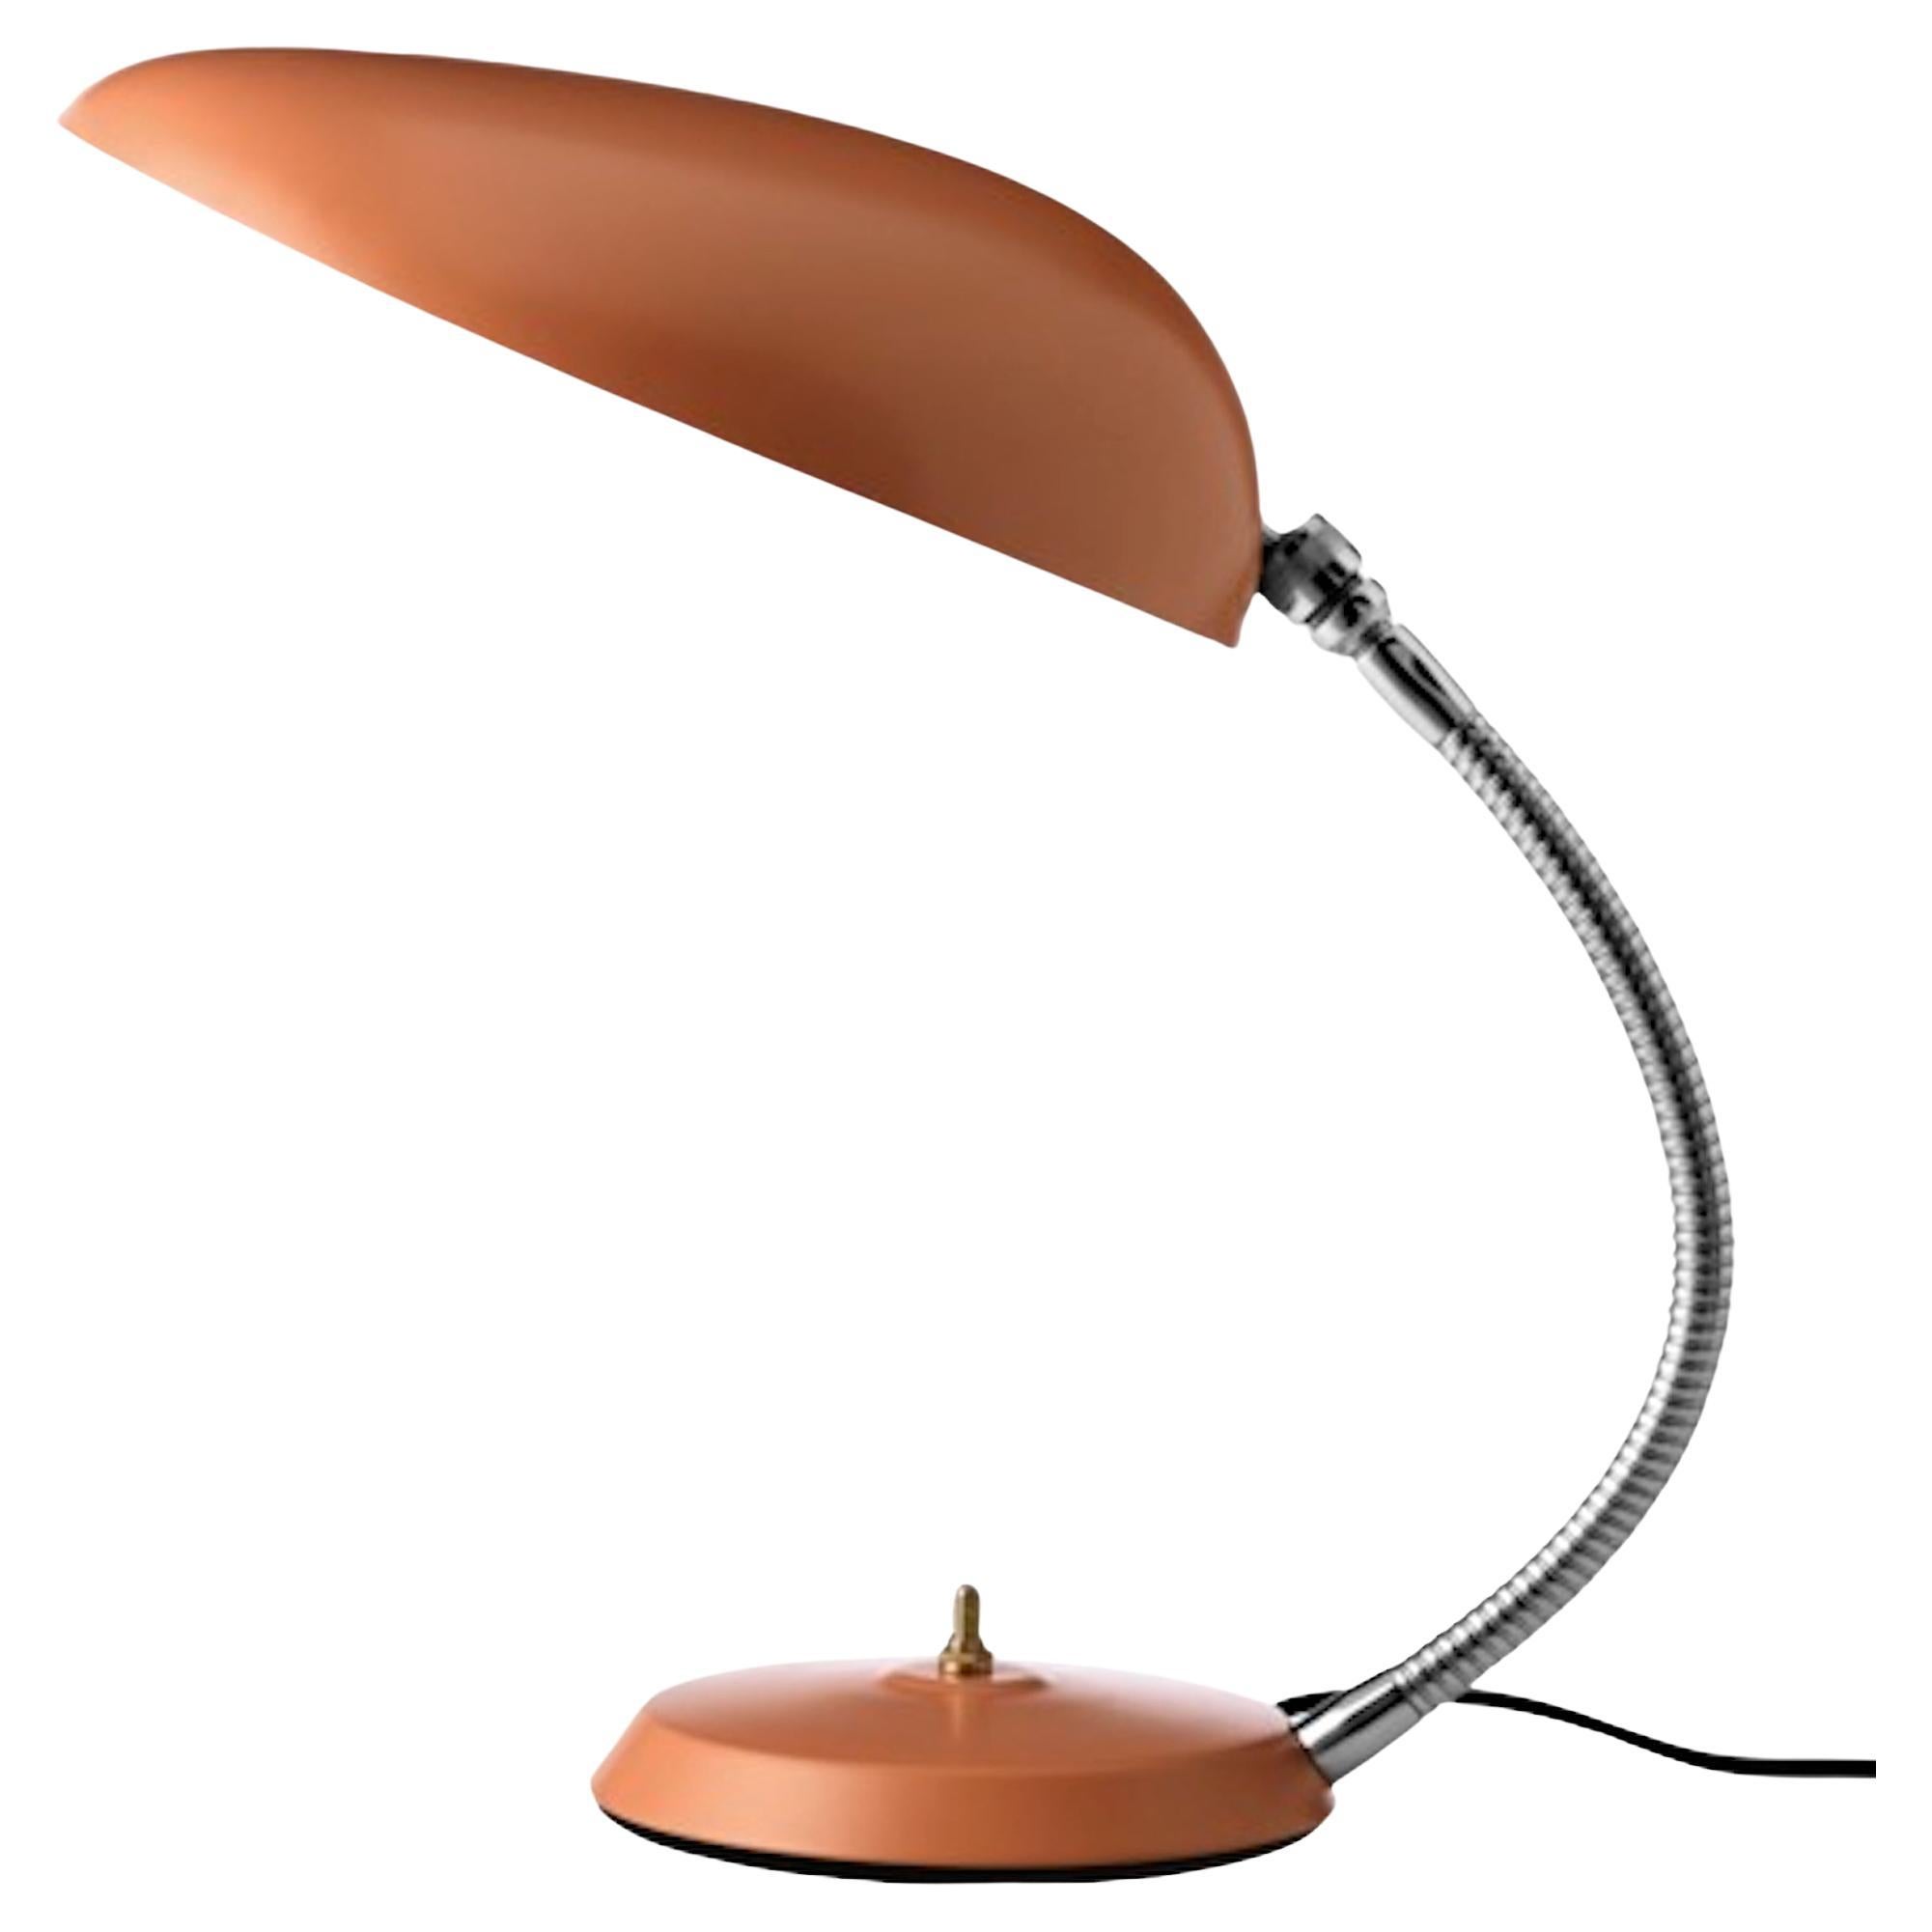 The authentic Cobra table lamp is of the most iconic designs by Greta M. Grossman. The table lamp was originally designed in the 1950s and takes its name from the shape of the oval shade, which is reminiscent of a cobra's neck. Due to its